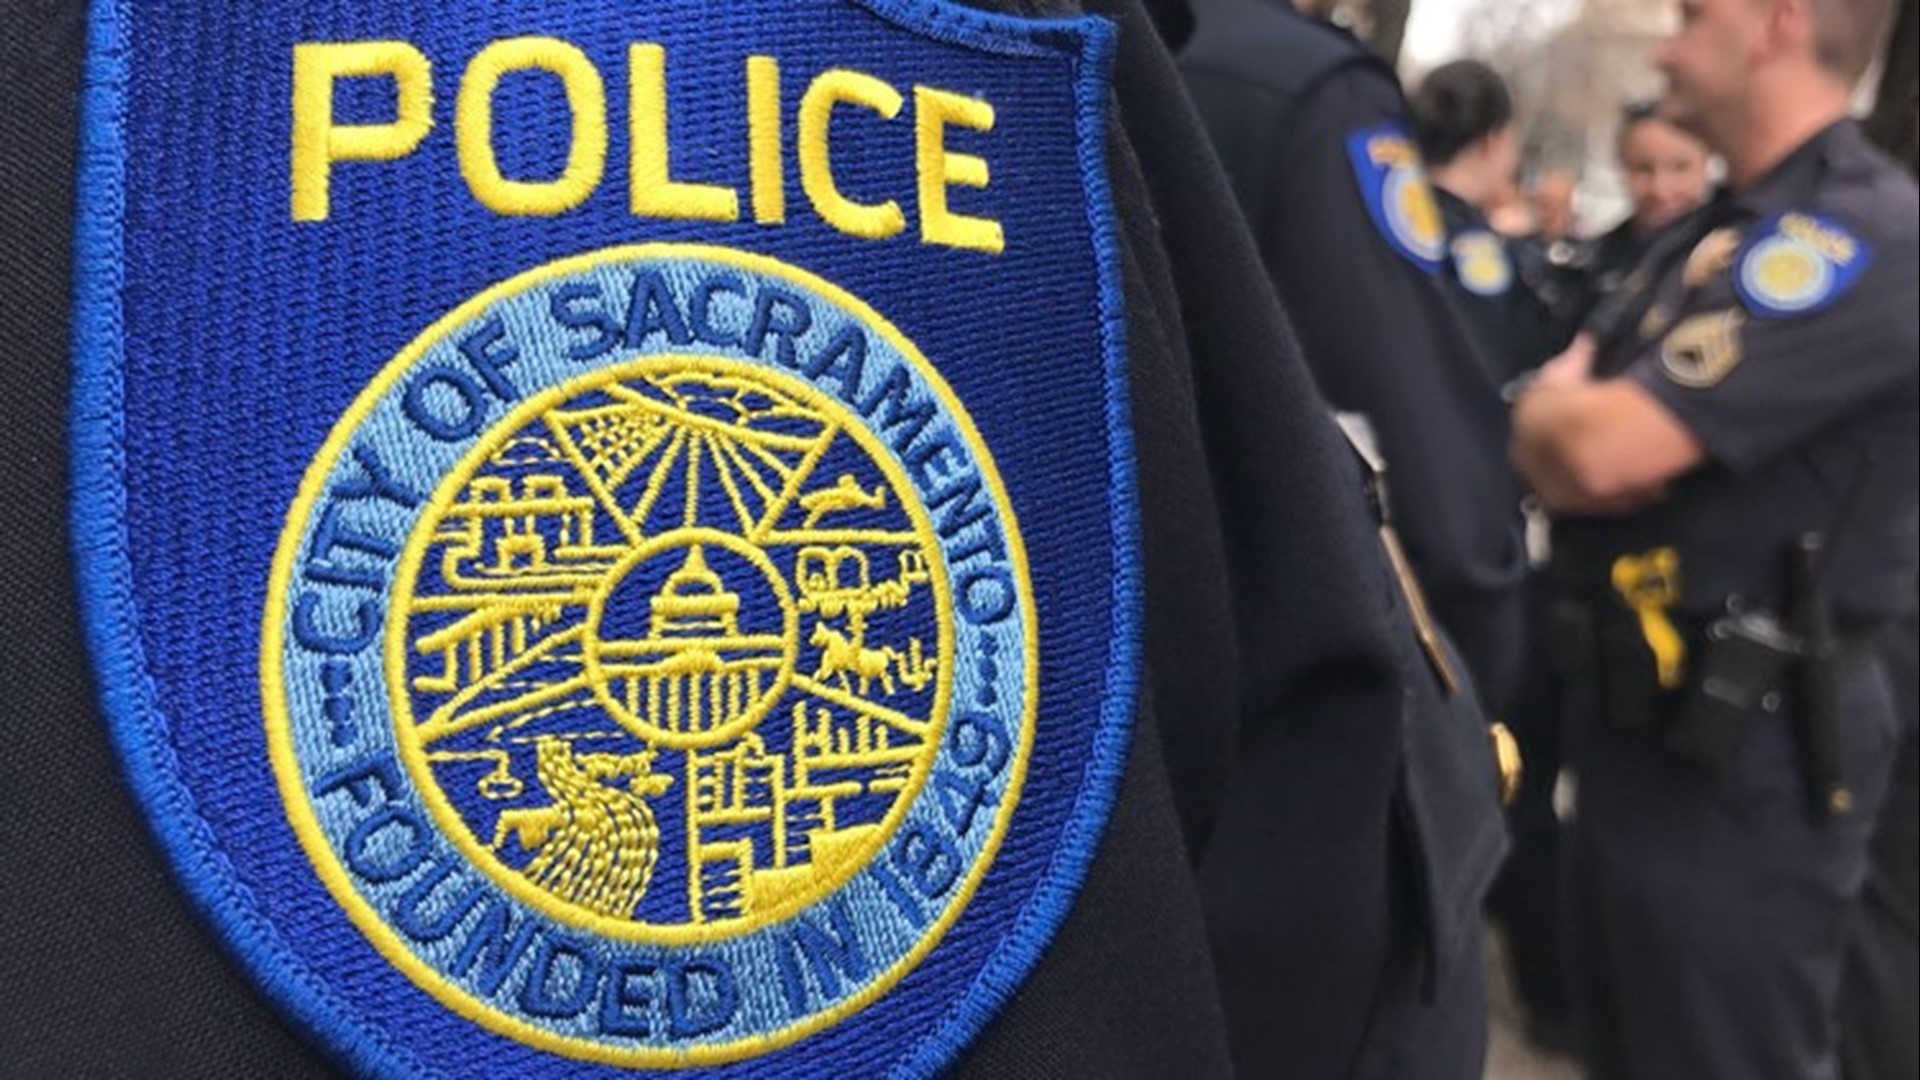 Chief Daniel Hahn commissioned the report after the police shooting of Stephon Clark back in 2018.